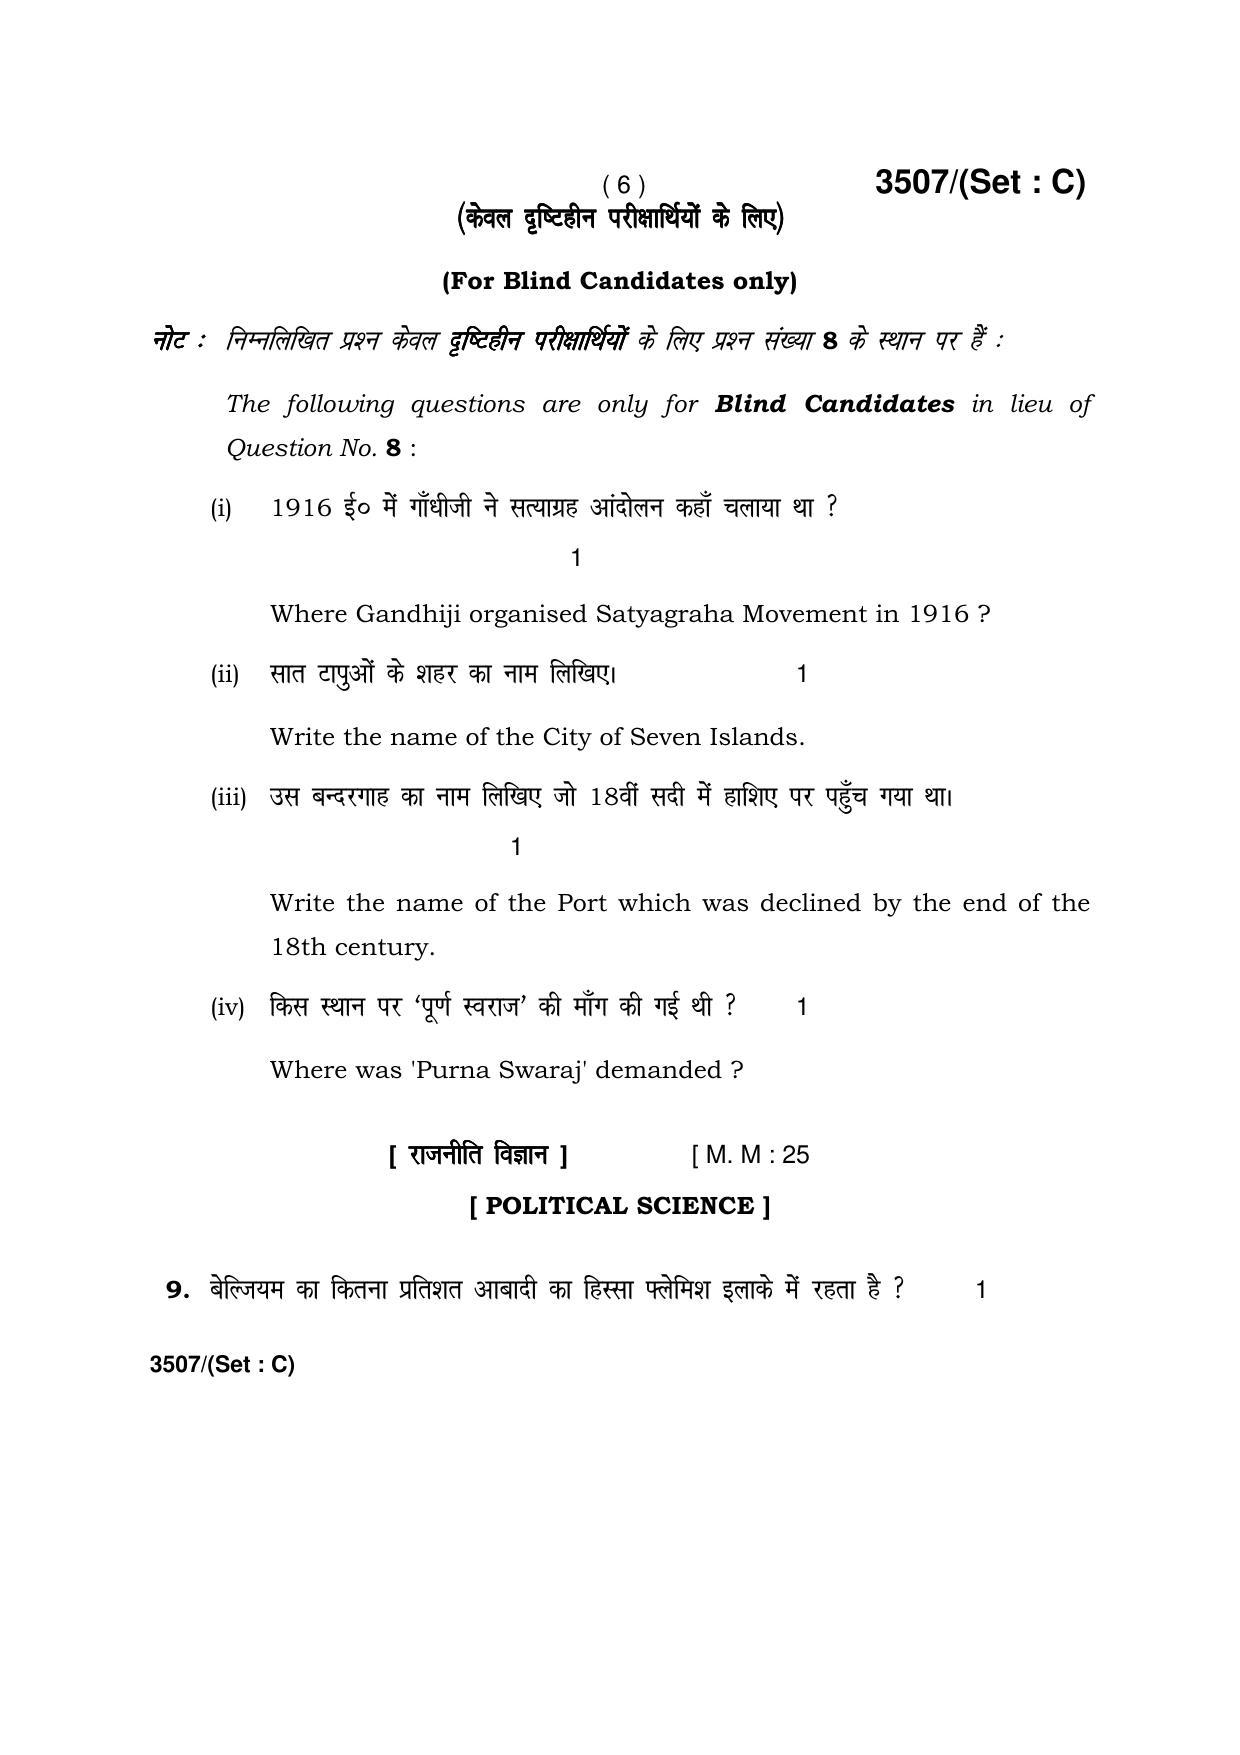  Haryana Board HBSE Class 10 Social Science -C 2018 Question Paper - Page 6